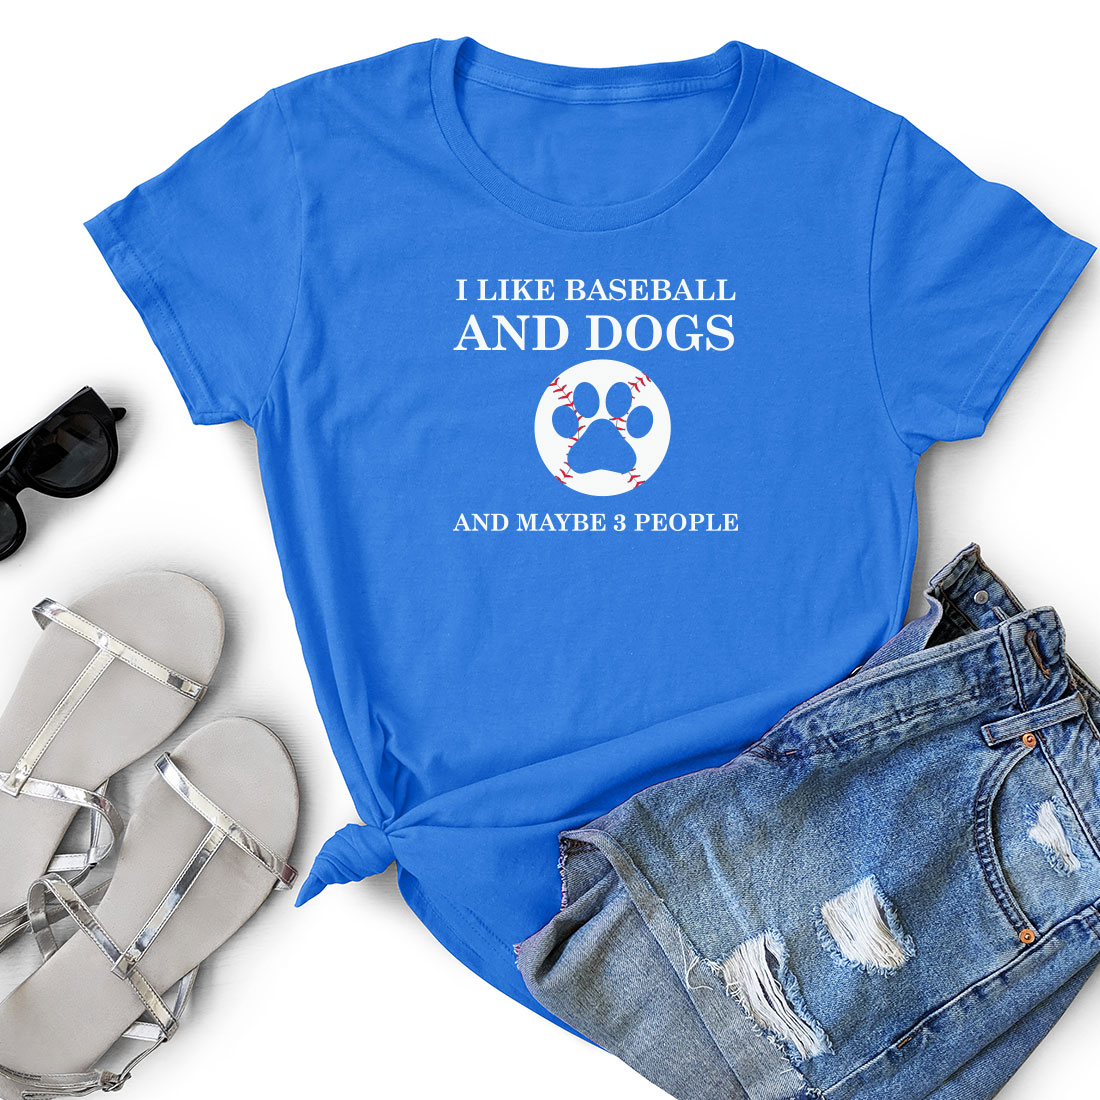 T - shirt that says i like baseball and dogs and maybe 3 people.